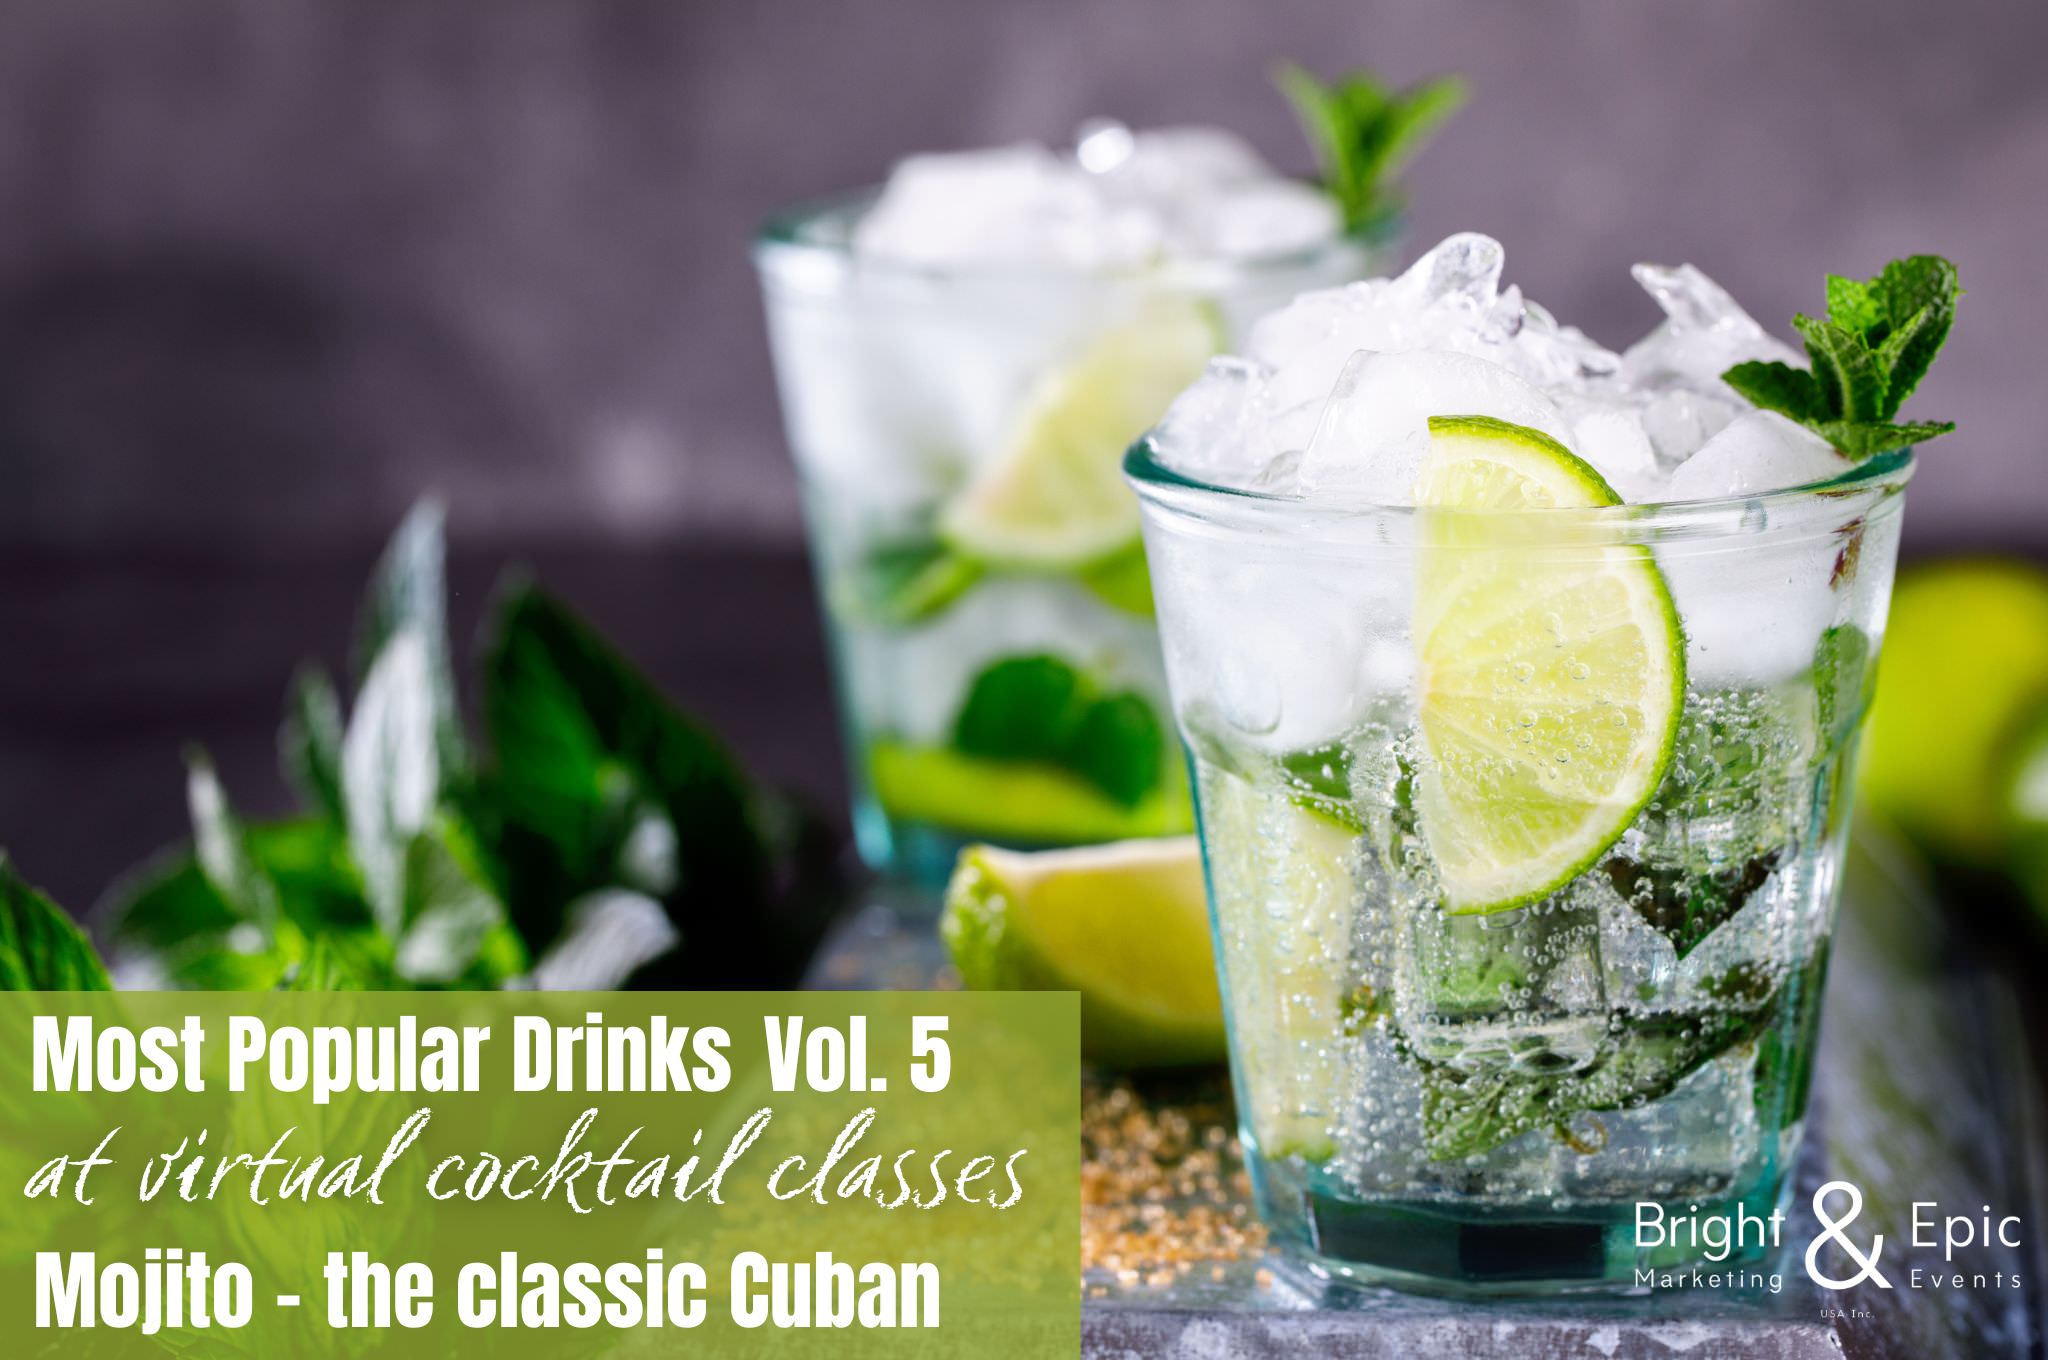 Virtual Cocktail Classes - Most popular cocktails Vol. 5 - Mojito Cocktail - brightandepic USA virtual Team Building Activities